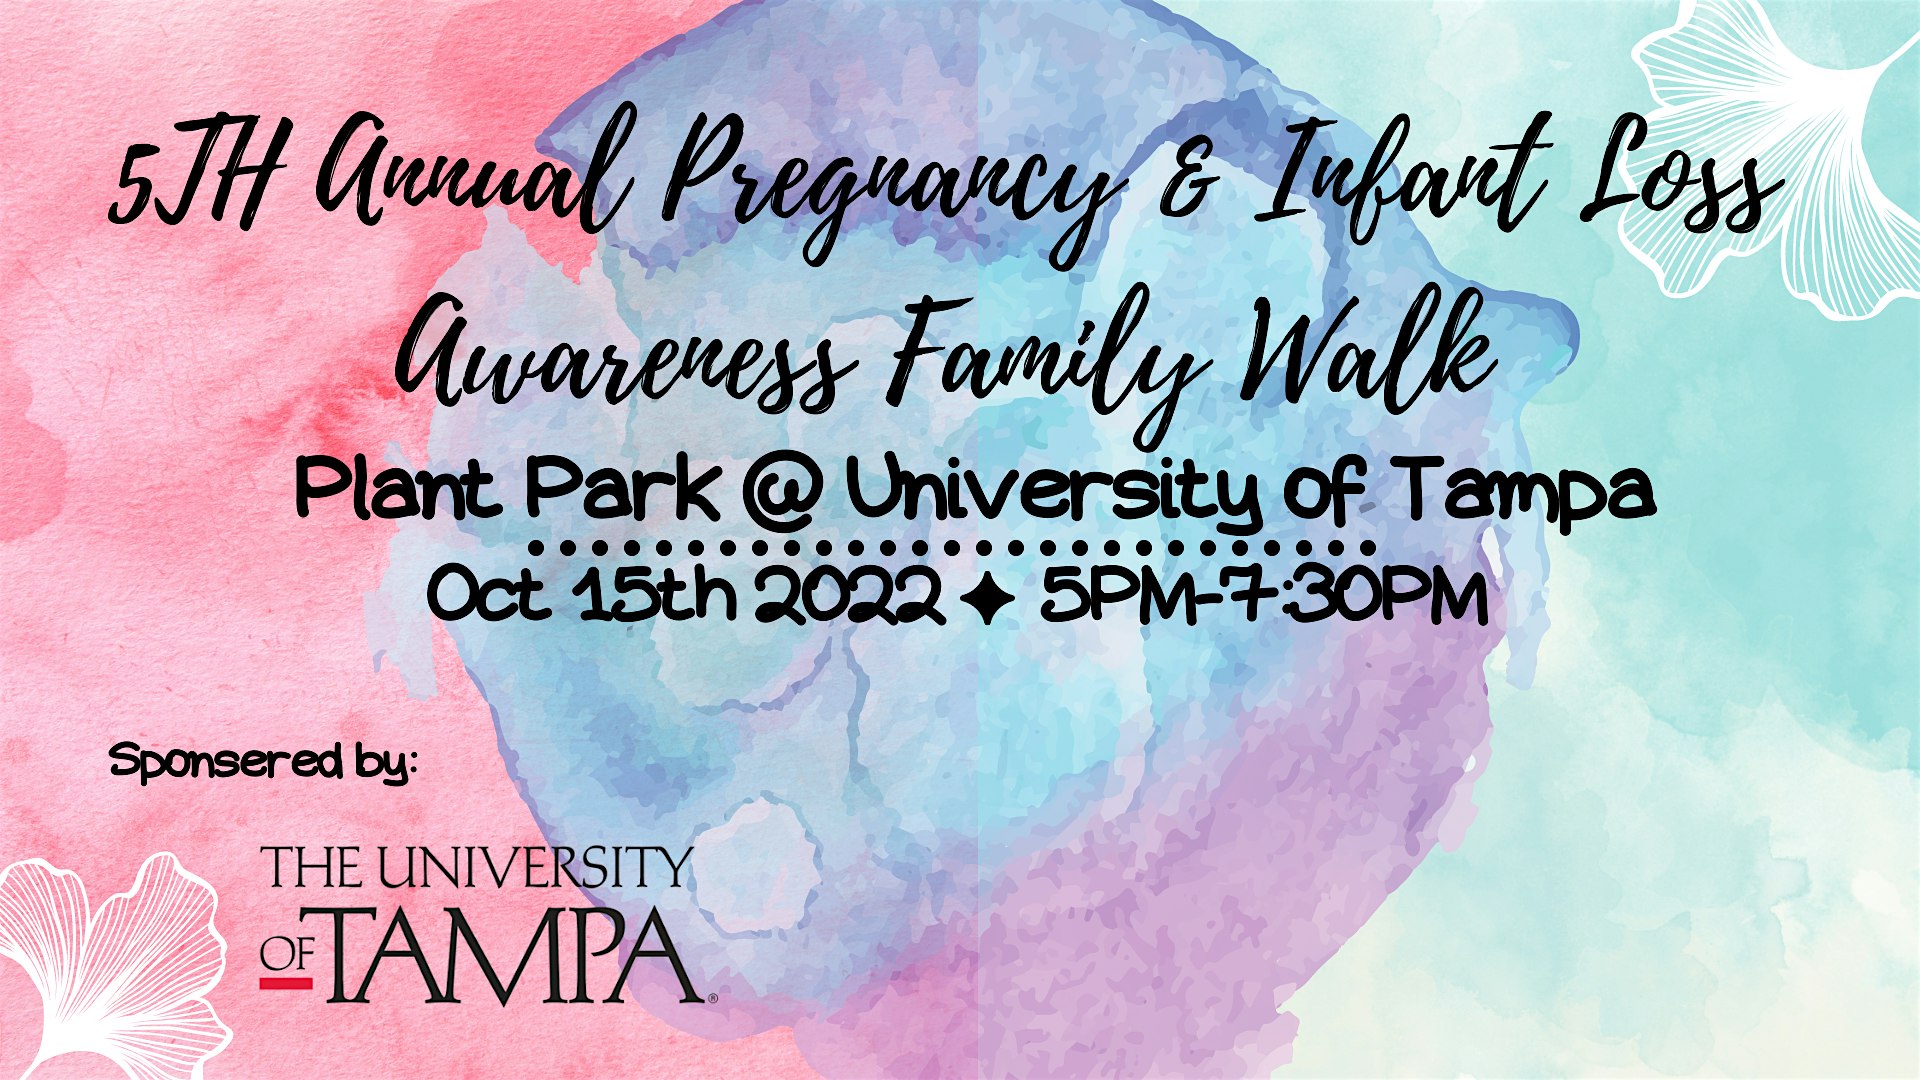 5th Annual Pregnancy & Infant Loss Awareness Family Walk